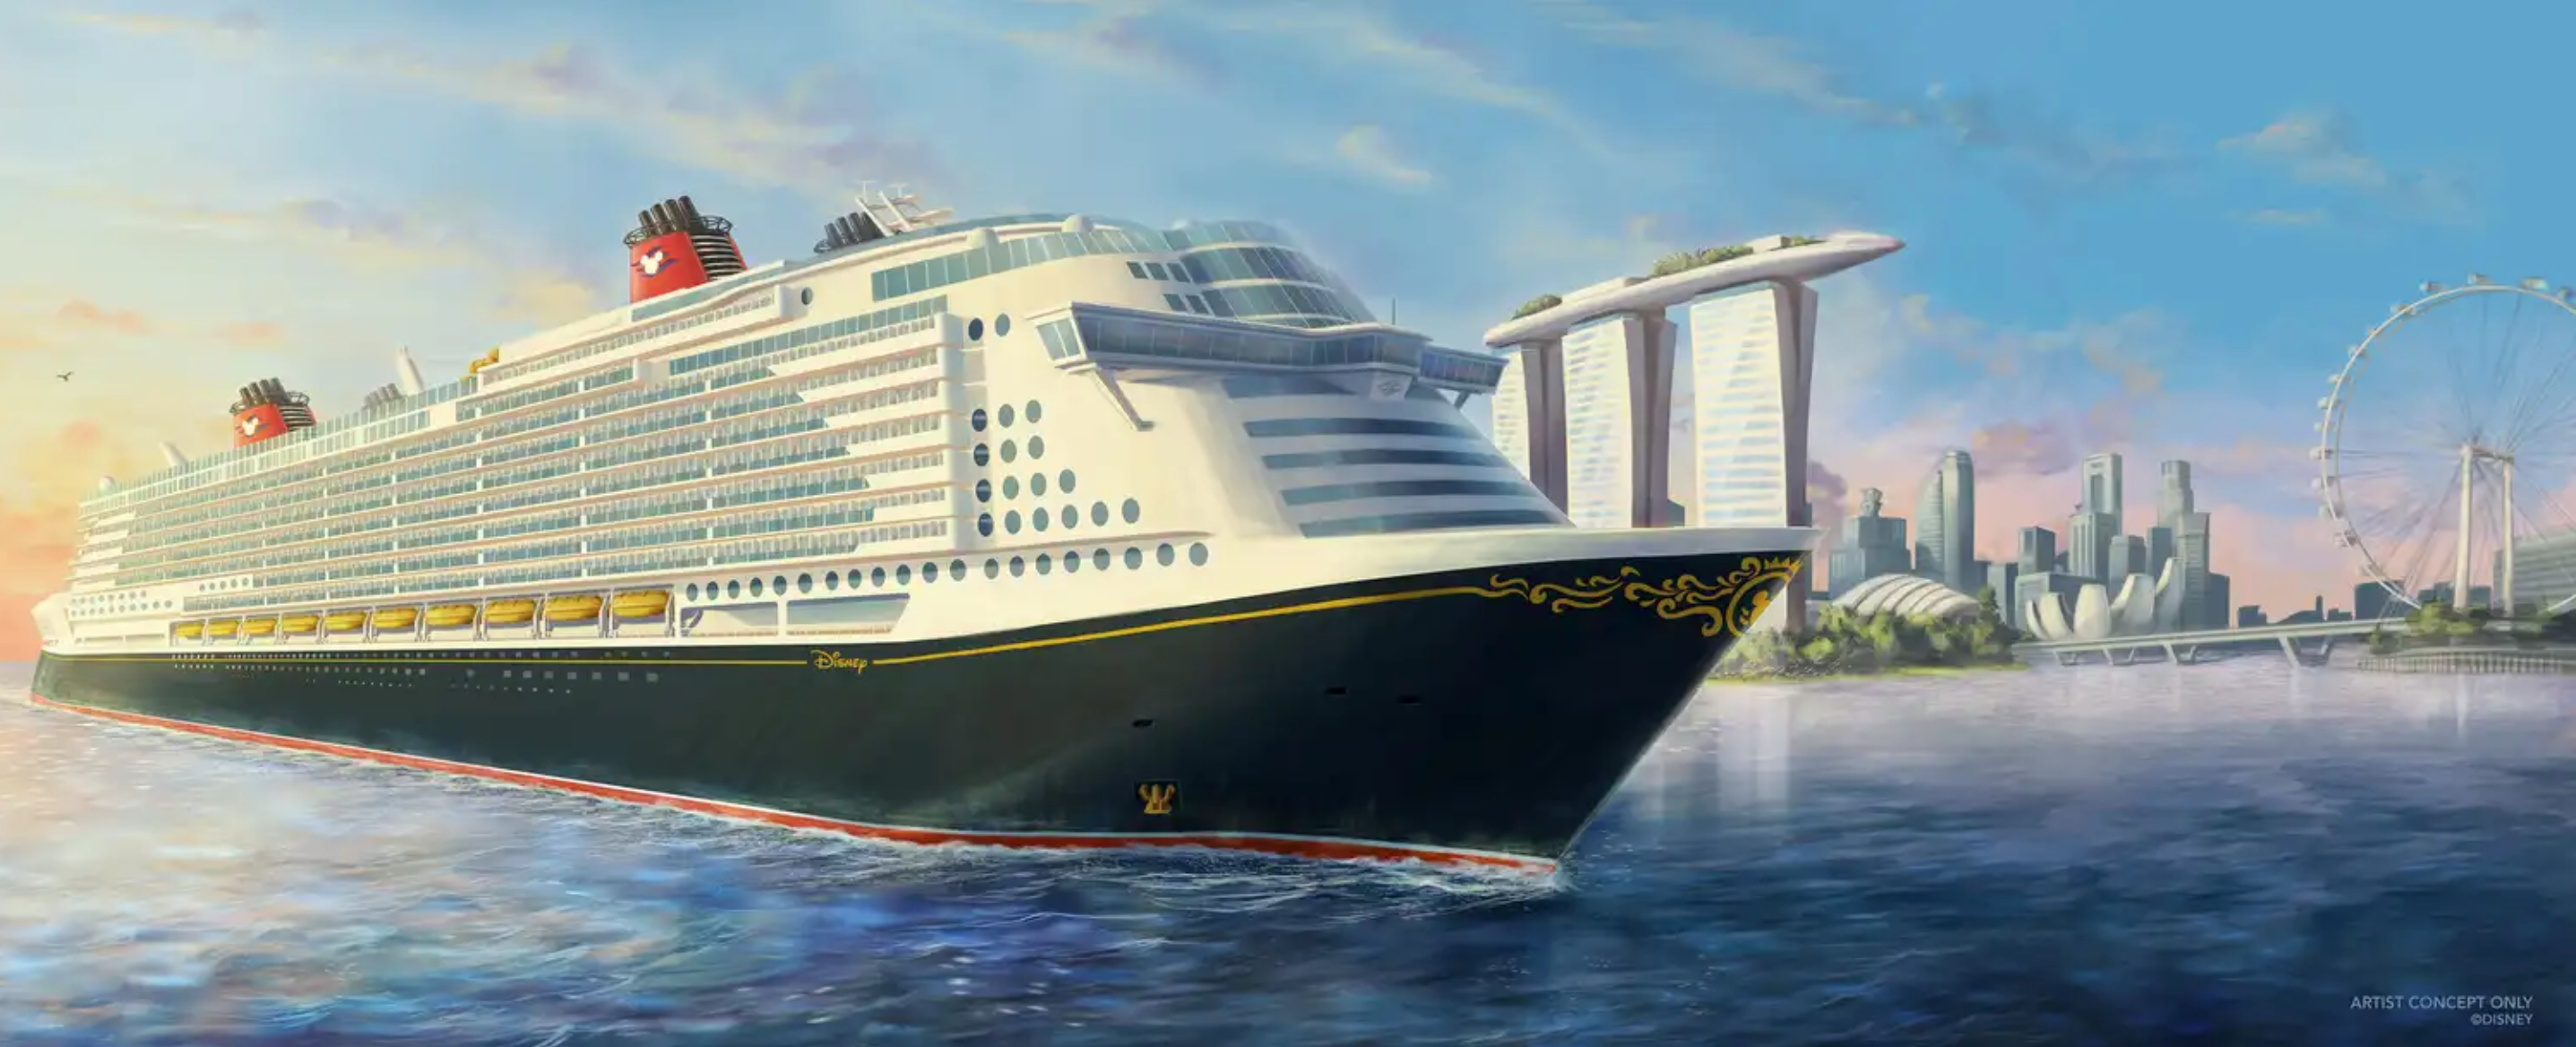 disney cruise ships oldest to newest